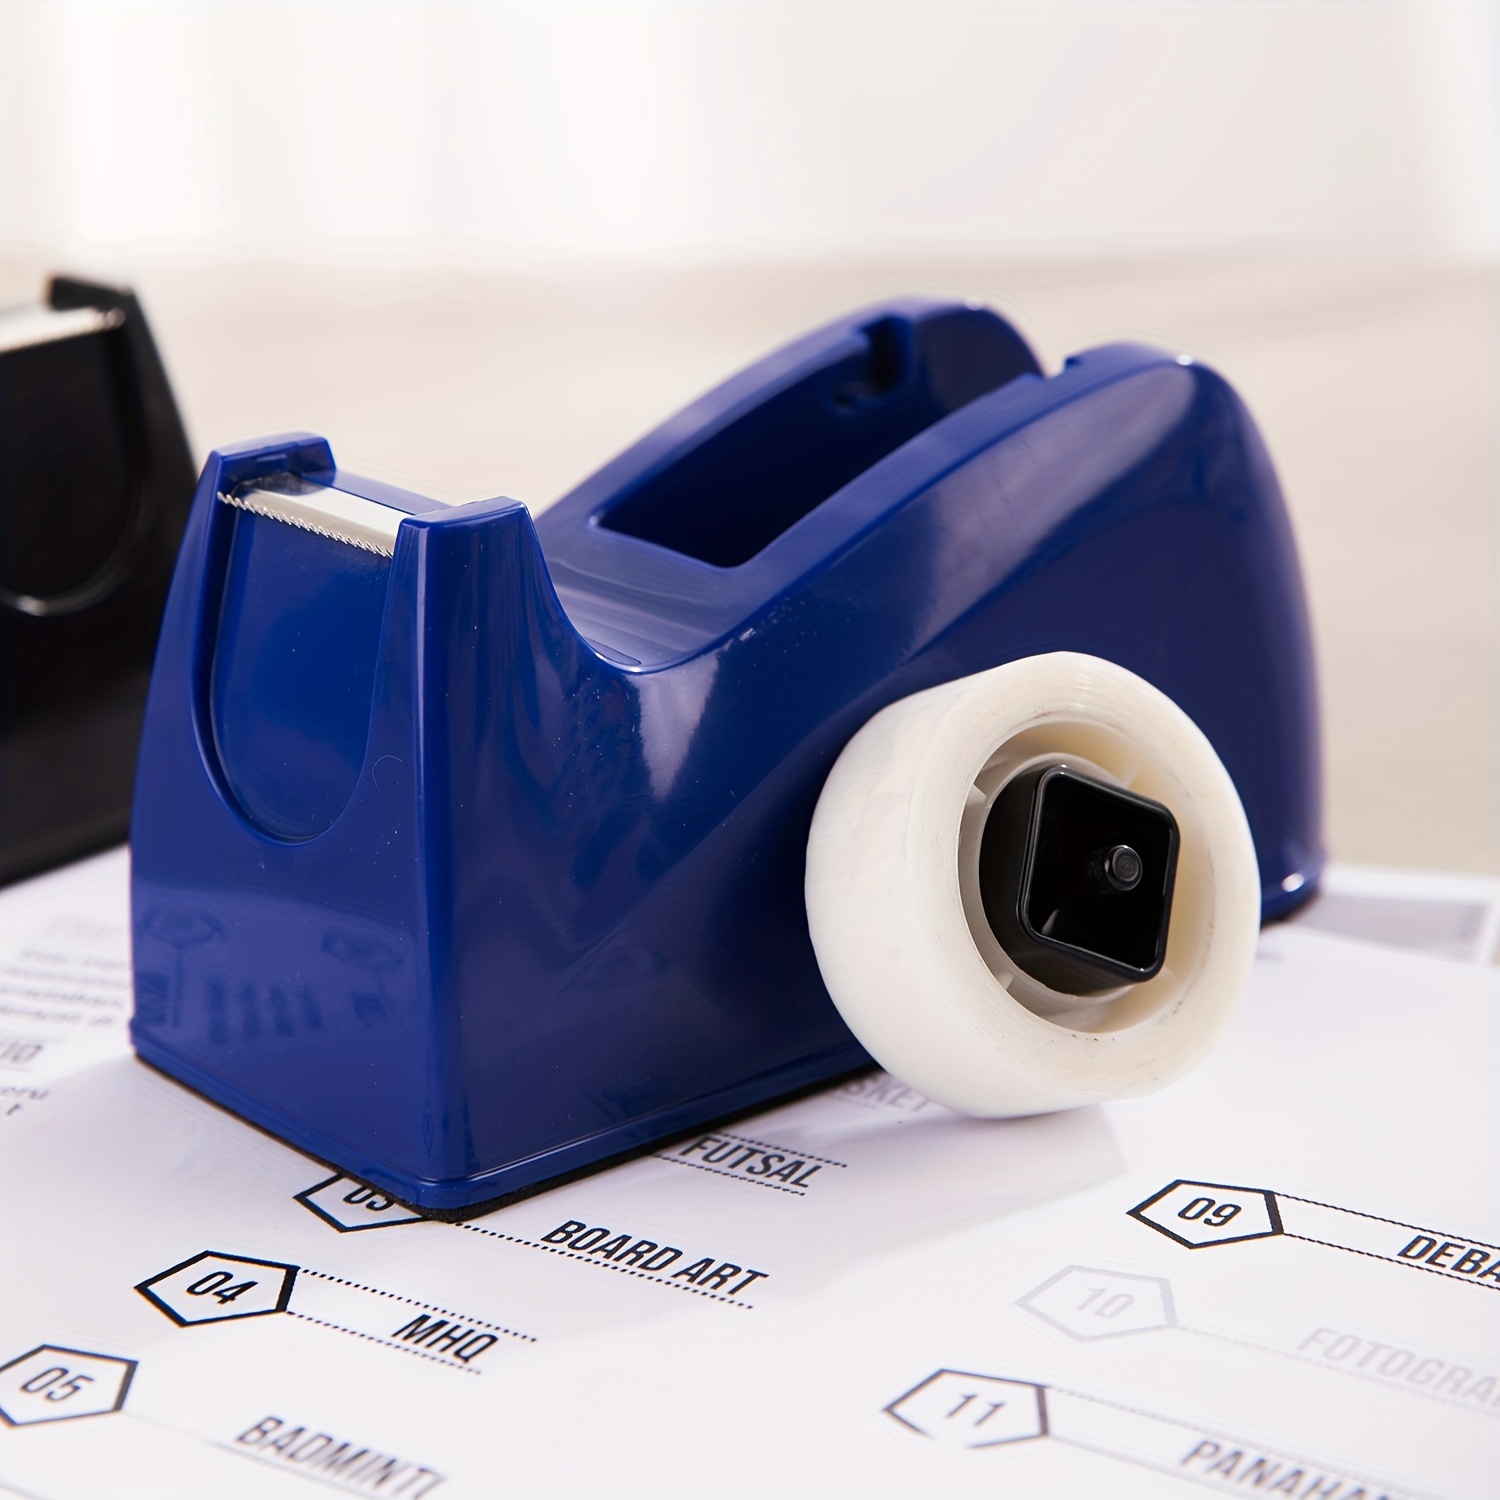 1pc Blue Desktop Tape Dispenser With Anti-slip Base, Suitable For Office,  Home, School, Tape Not Included